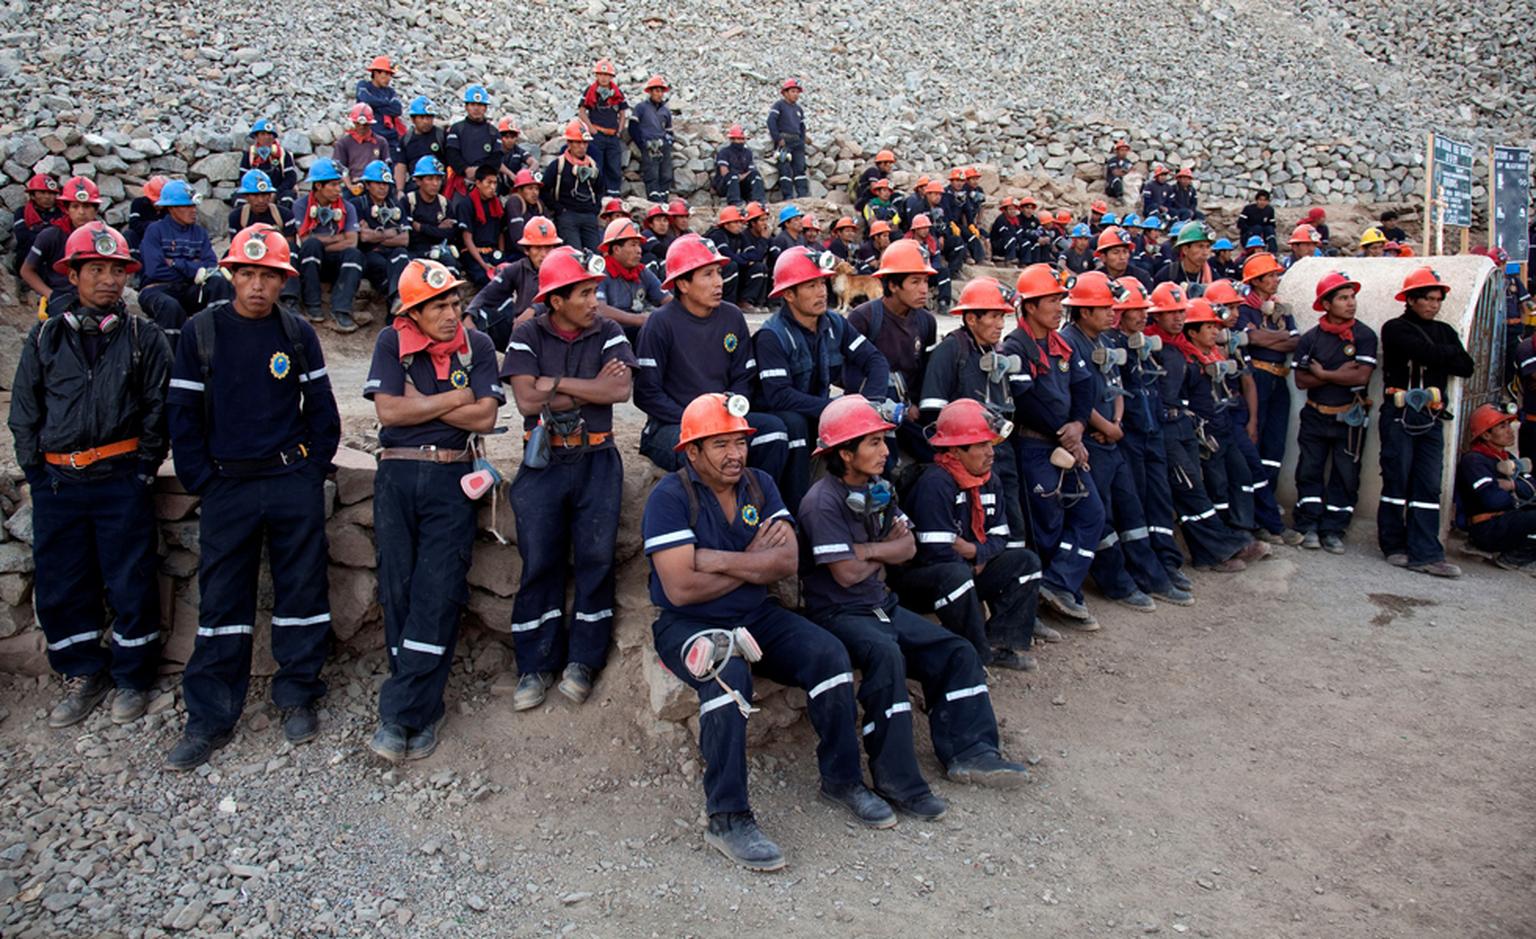 Workers gather at 7:00 am outside the gold mine in Santa Filomena, in Peru. These miners are guaranteed a fair deal and safe working conditions under the Fairtrade regime. Photo: Eduardo Martino